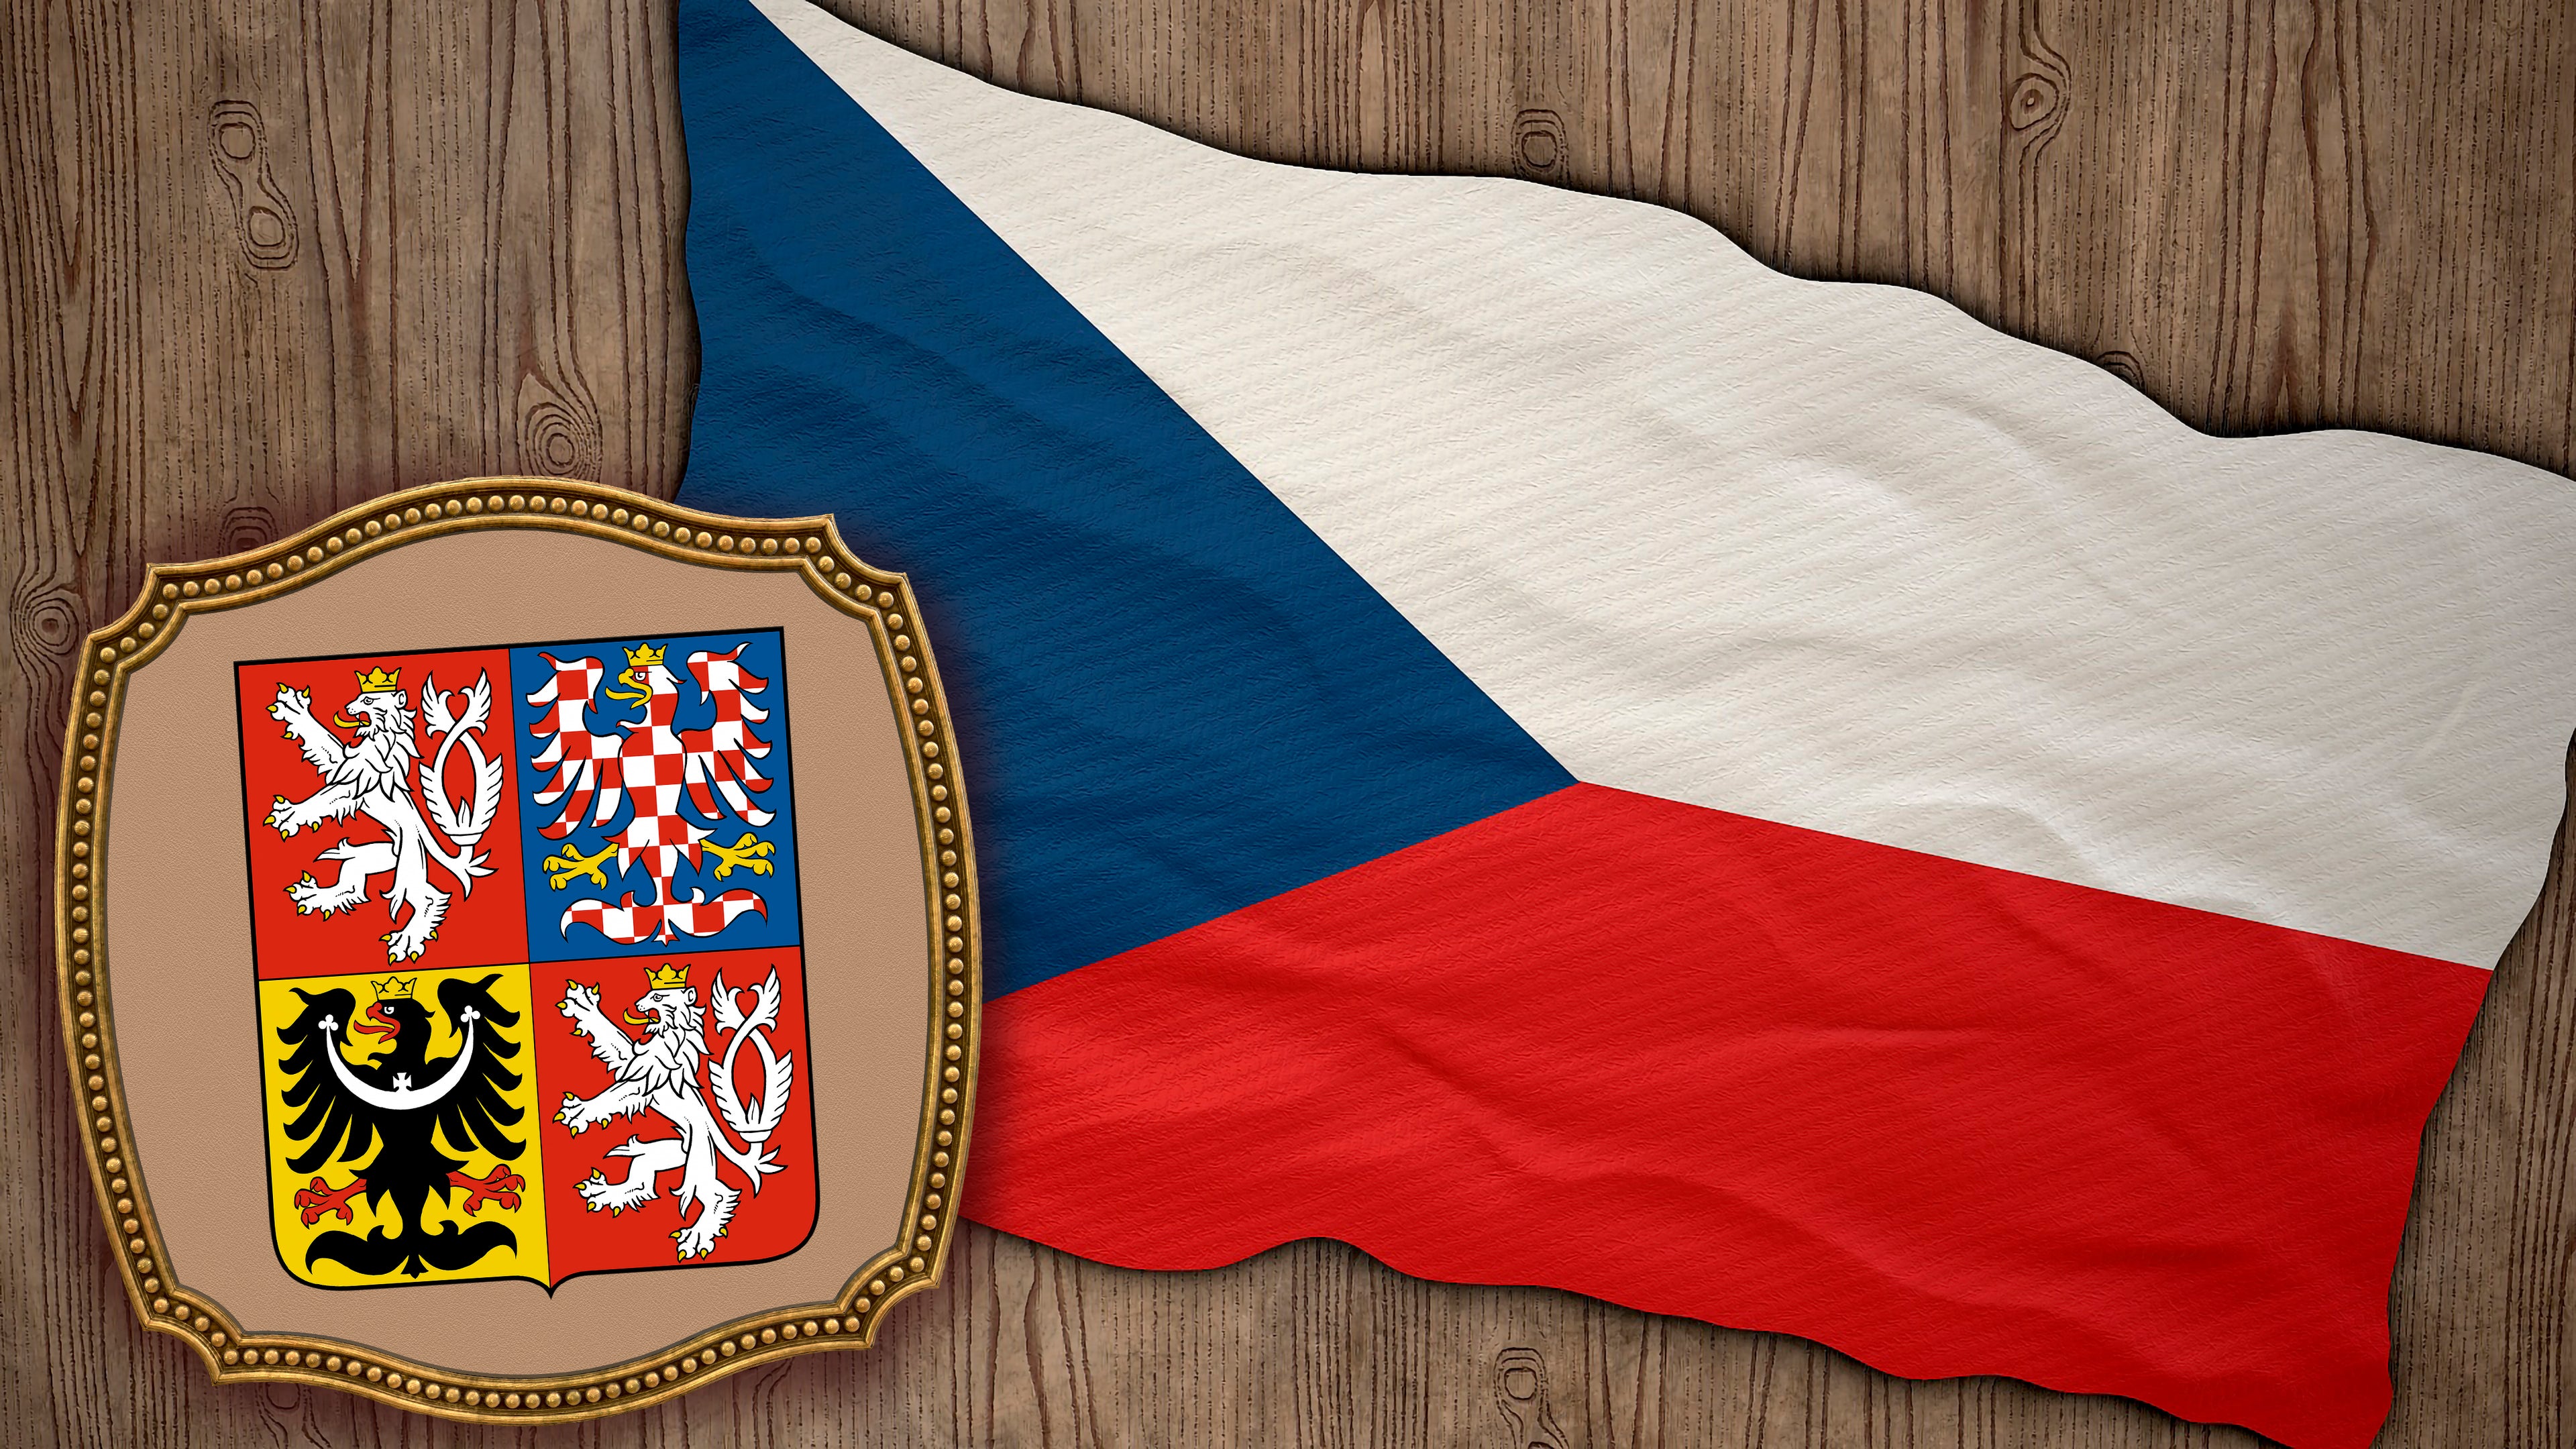 Czech flag on wooden background with Czech Republic Coat of Arms Seal